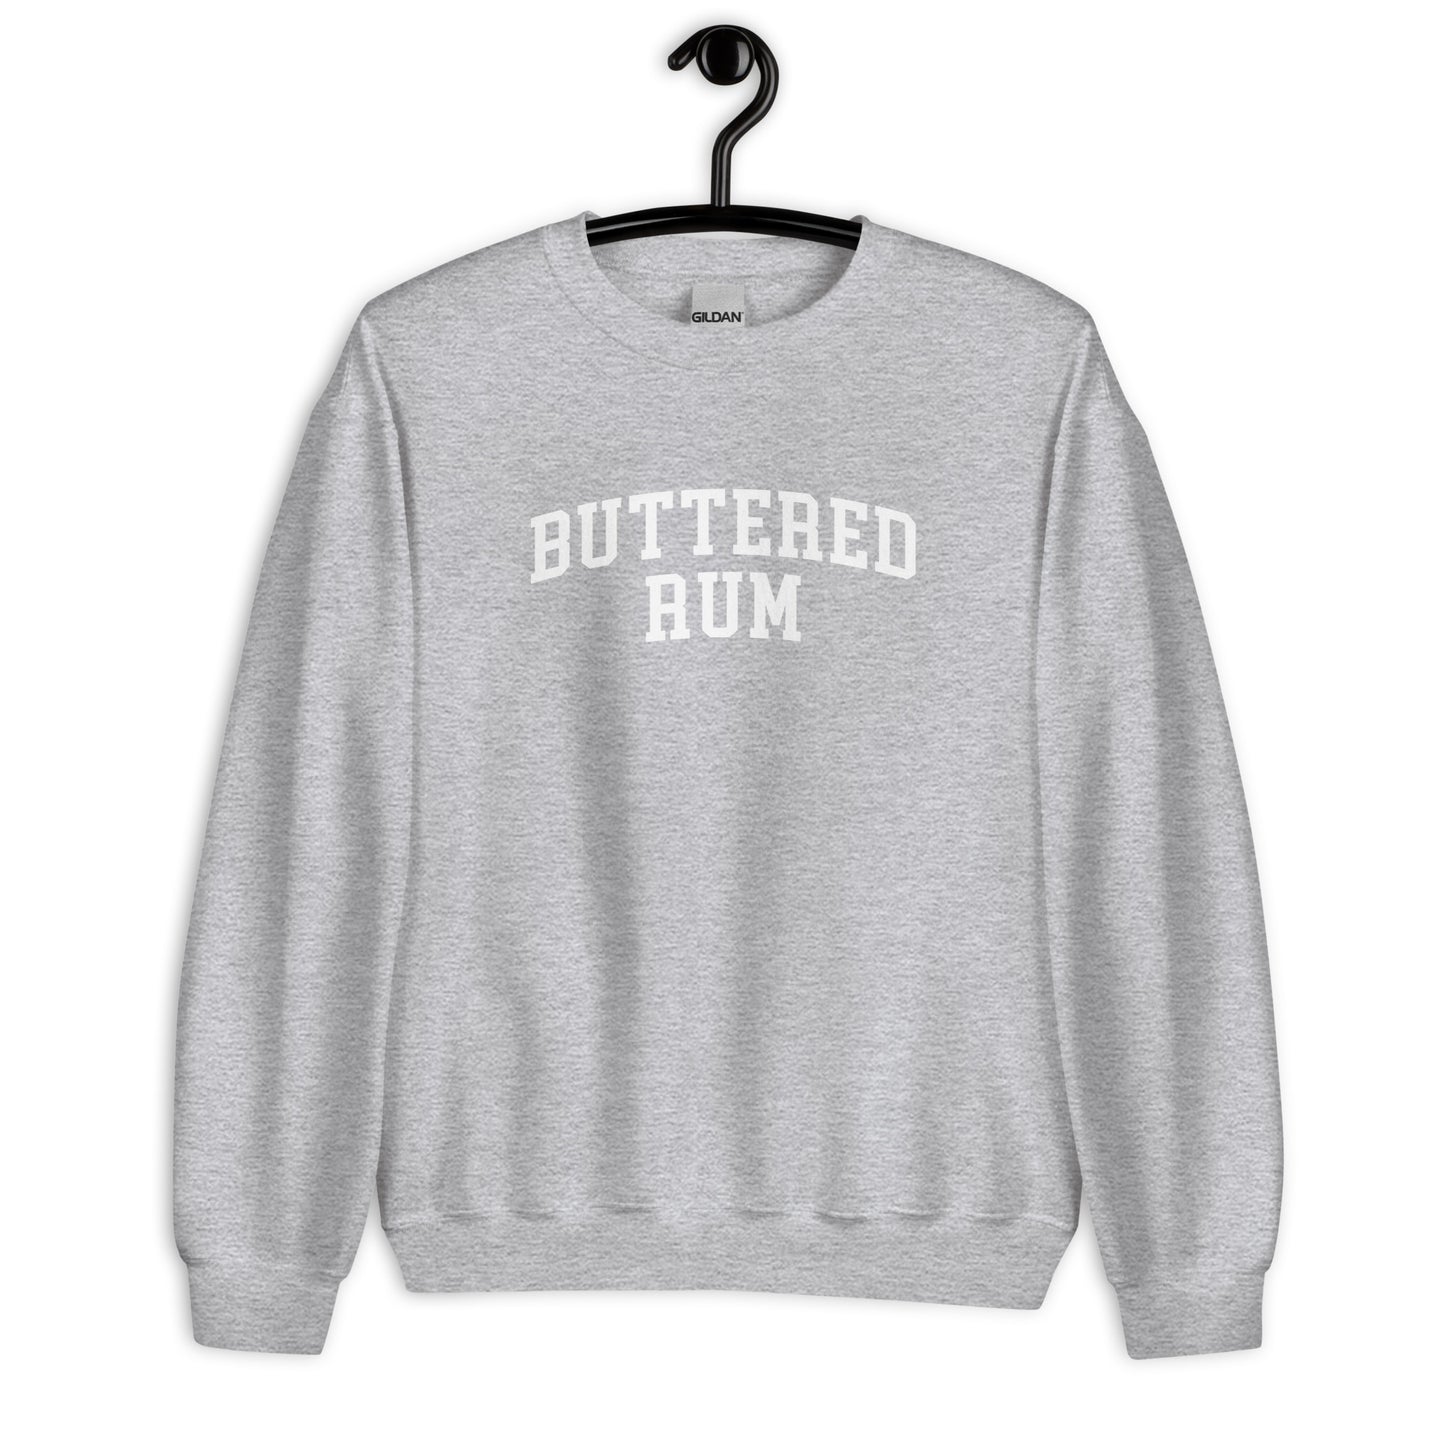 Buttered Rum Sweatshirt - Arched Font